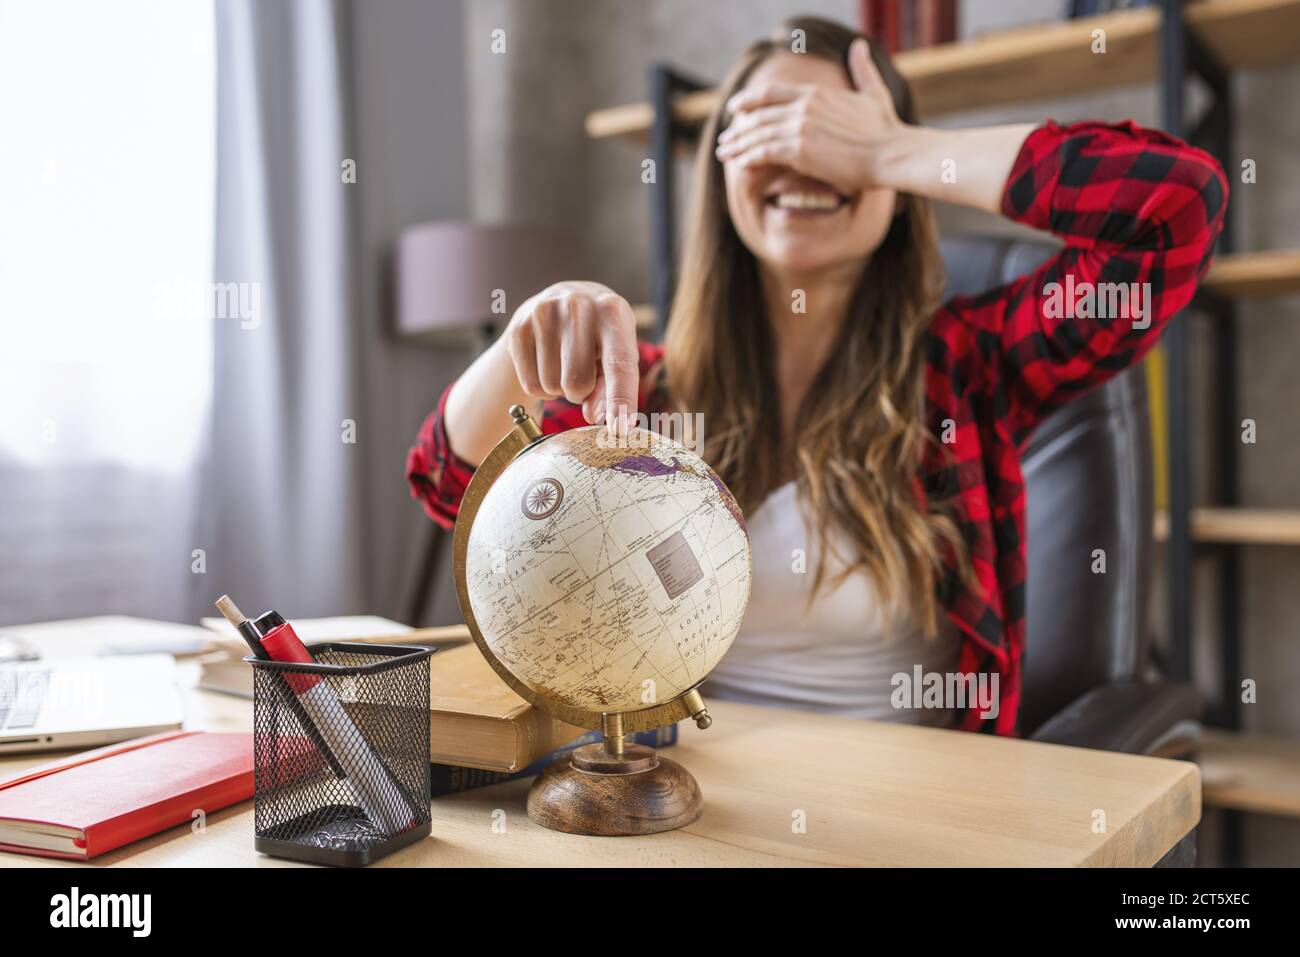 Student is stressed and wants a break with a trip around the world Stock Photo